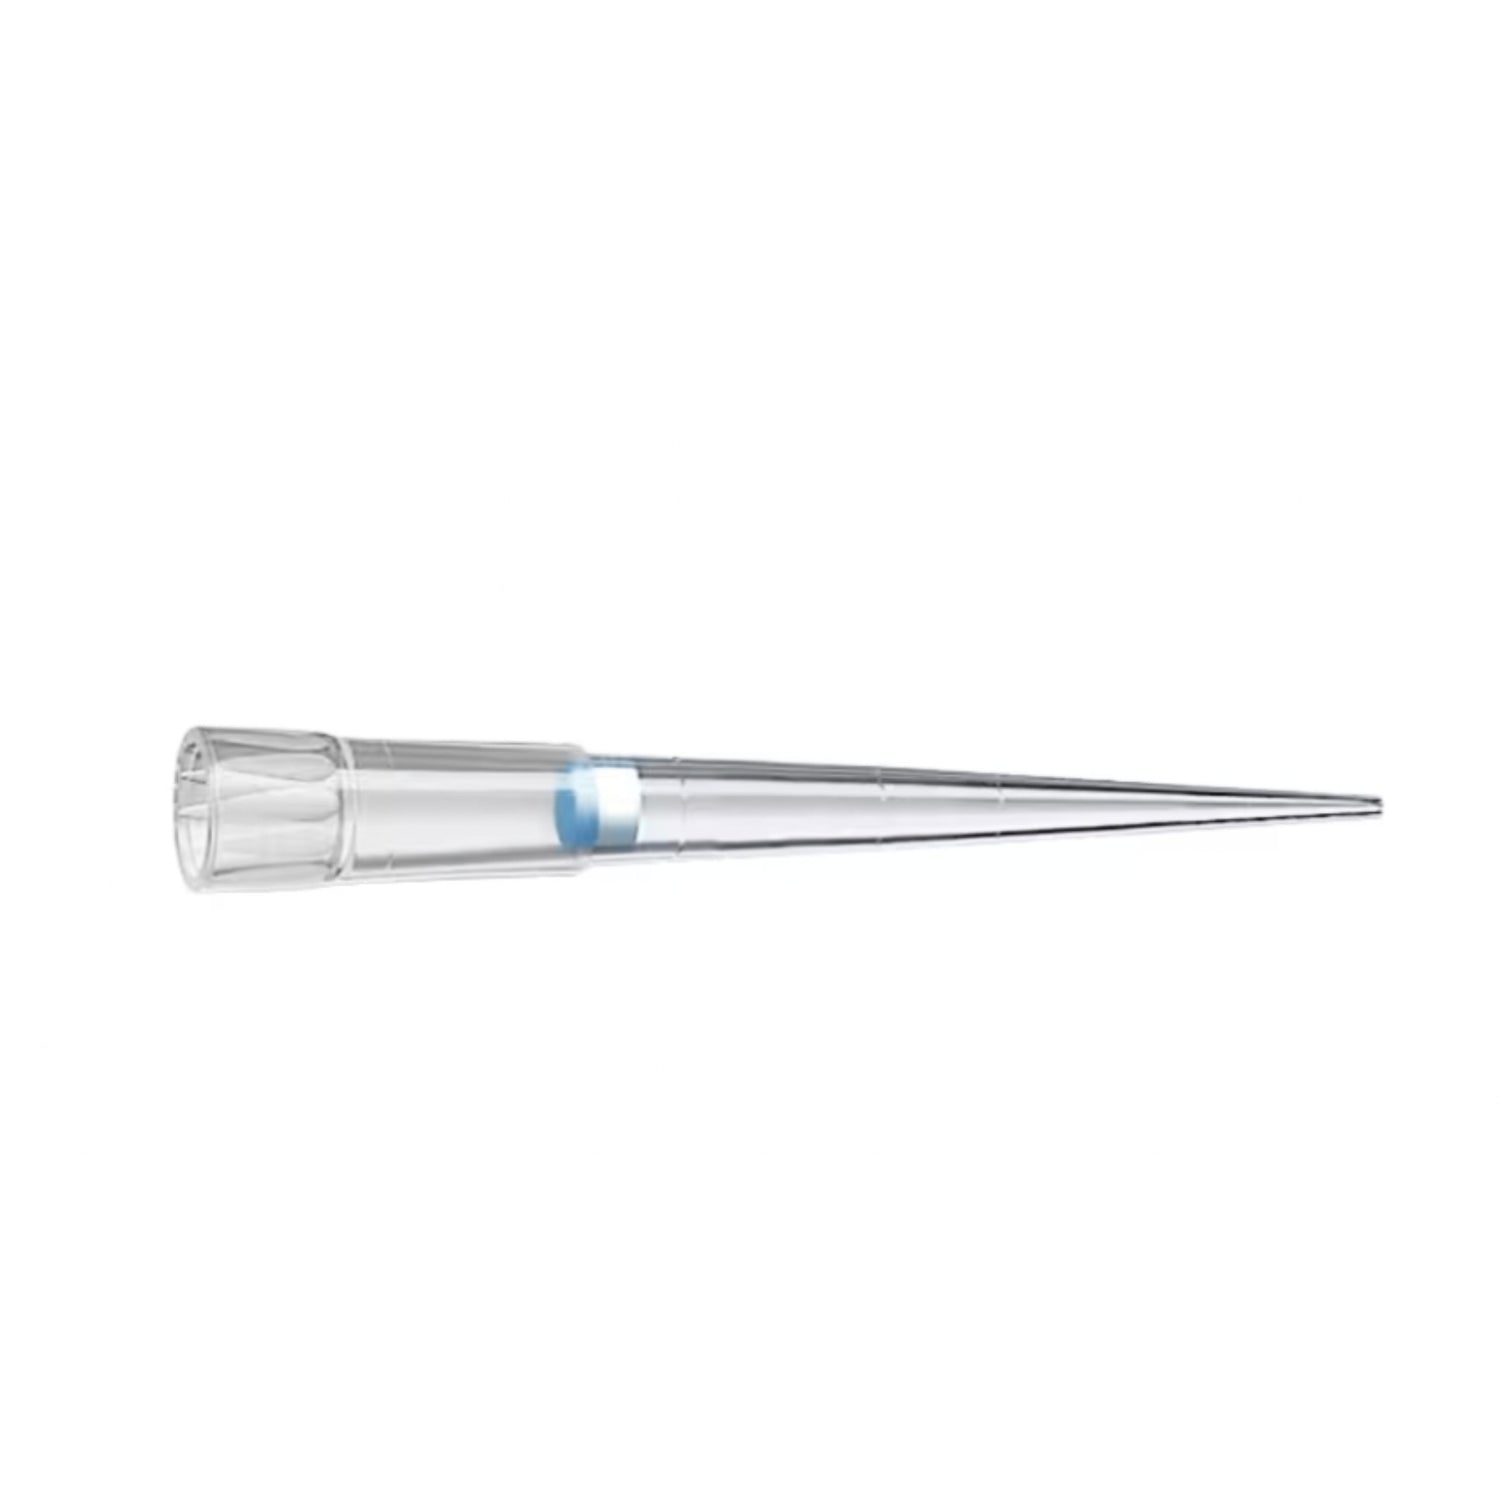 Filter pipette tip